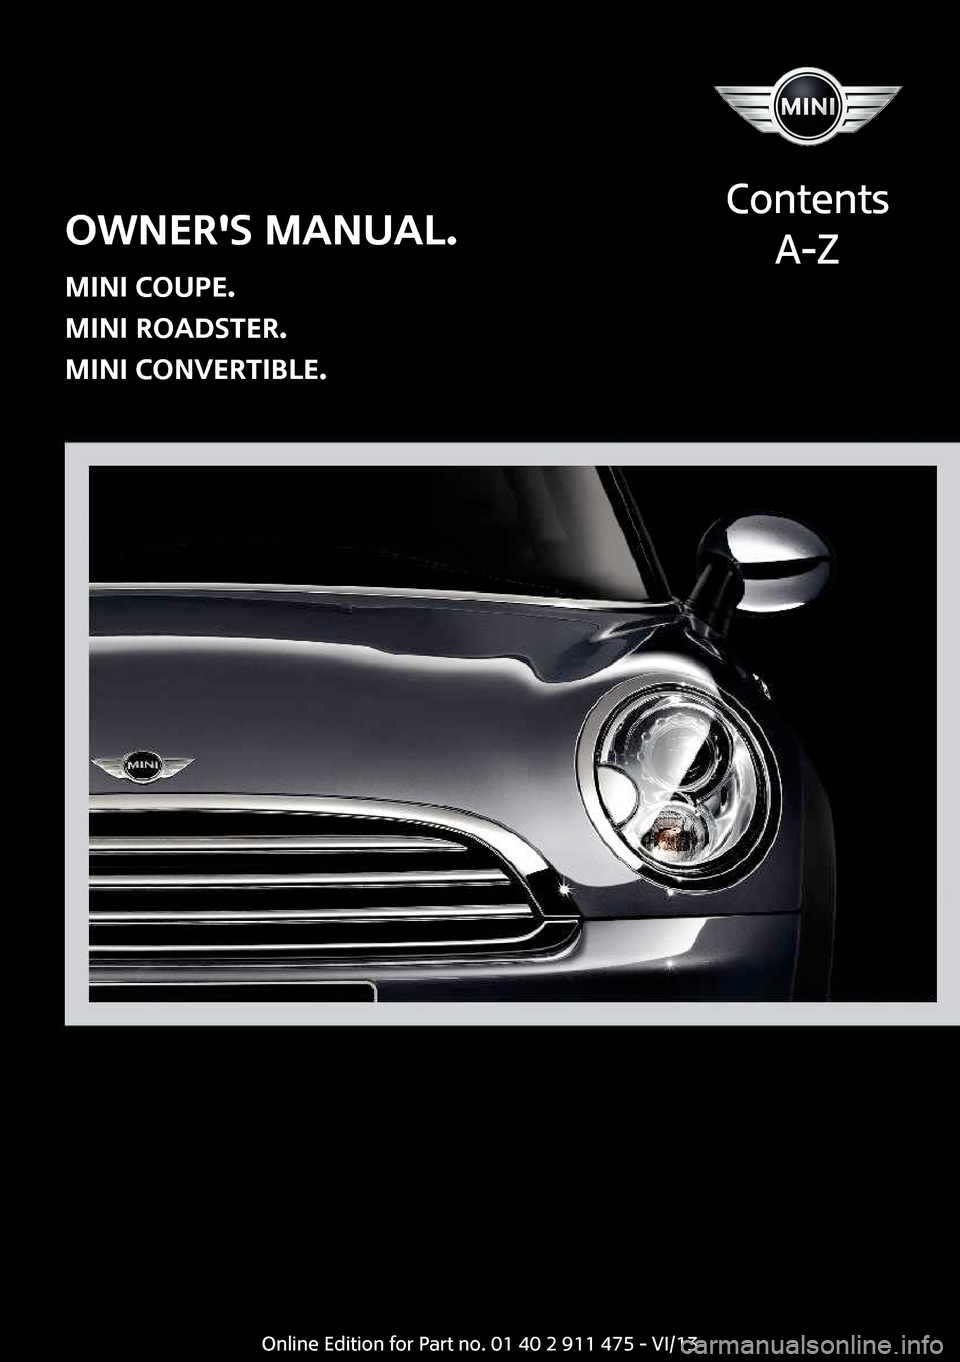 MINI Coupe 2014  Owners Manual Owners Manual.
MINI Coupe.
MINI Roadster.
MINI Convertible.
Contents
A-ZOnline Edition for Part no. 01 40 2 911 475 - VI/13  